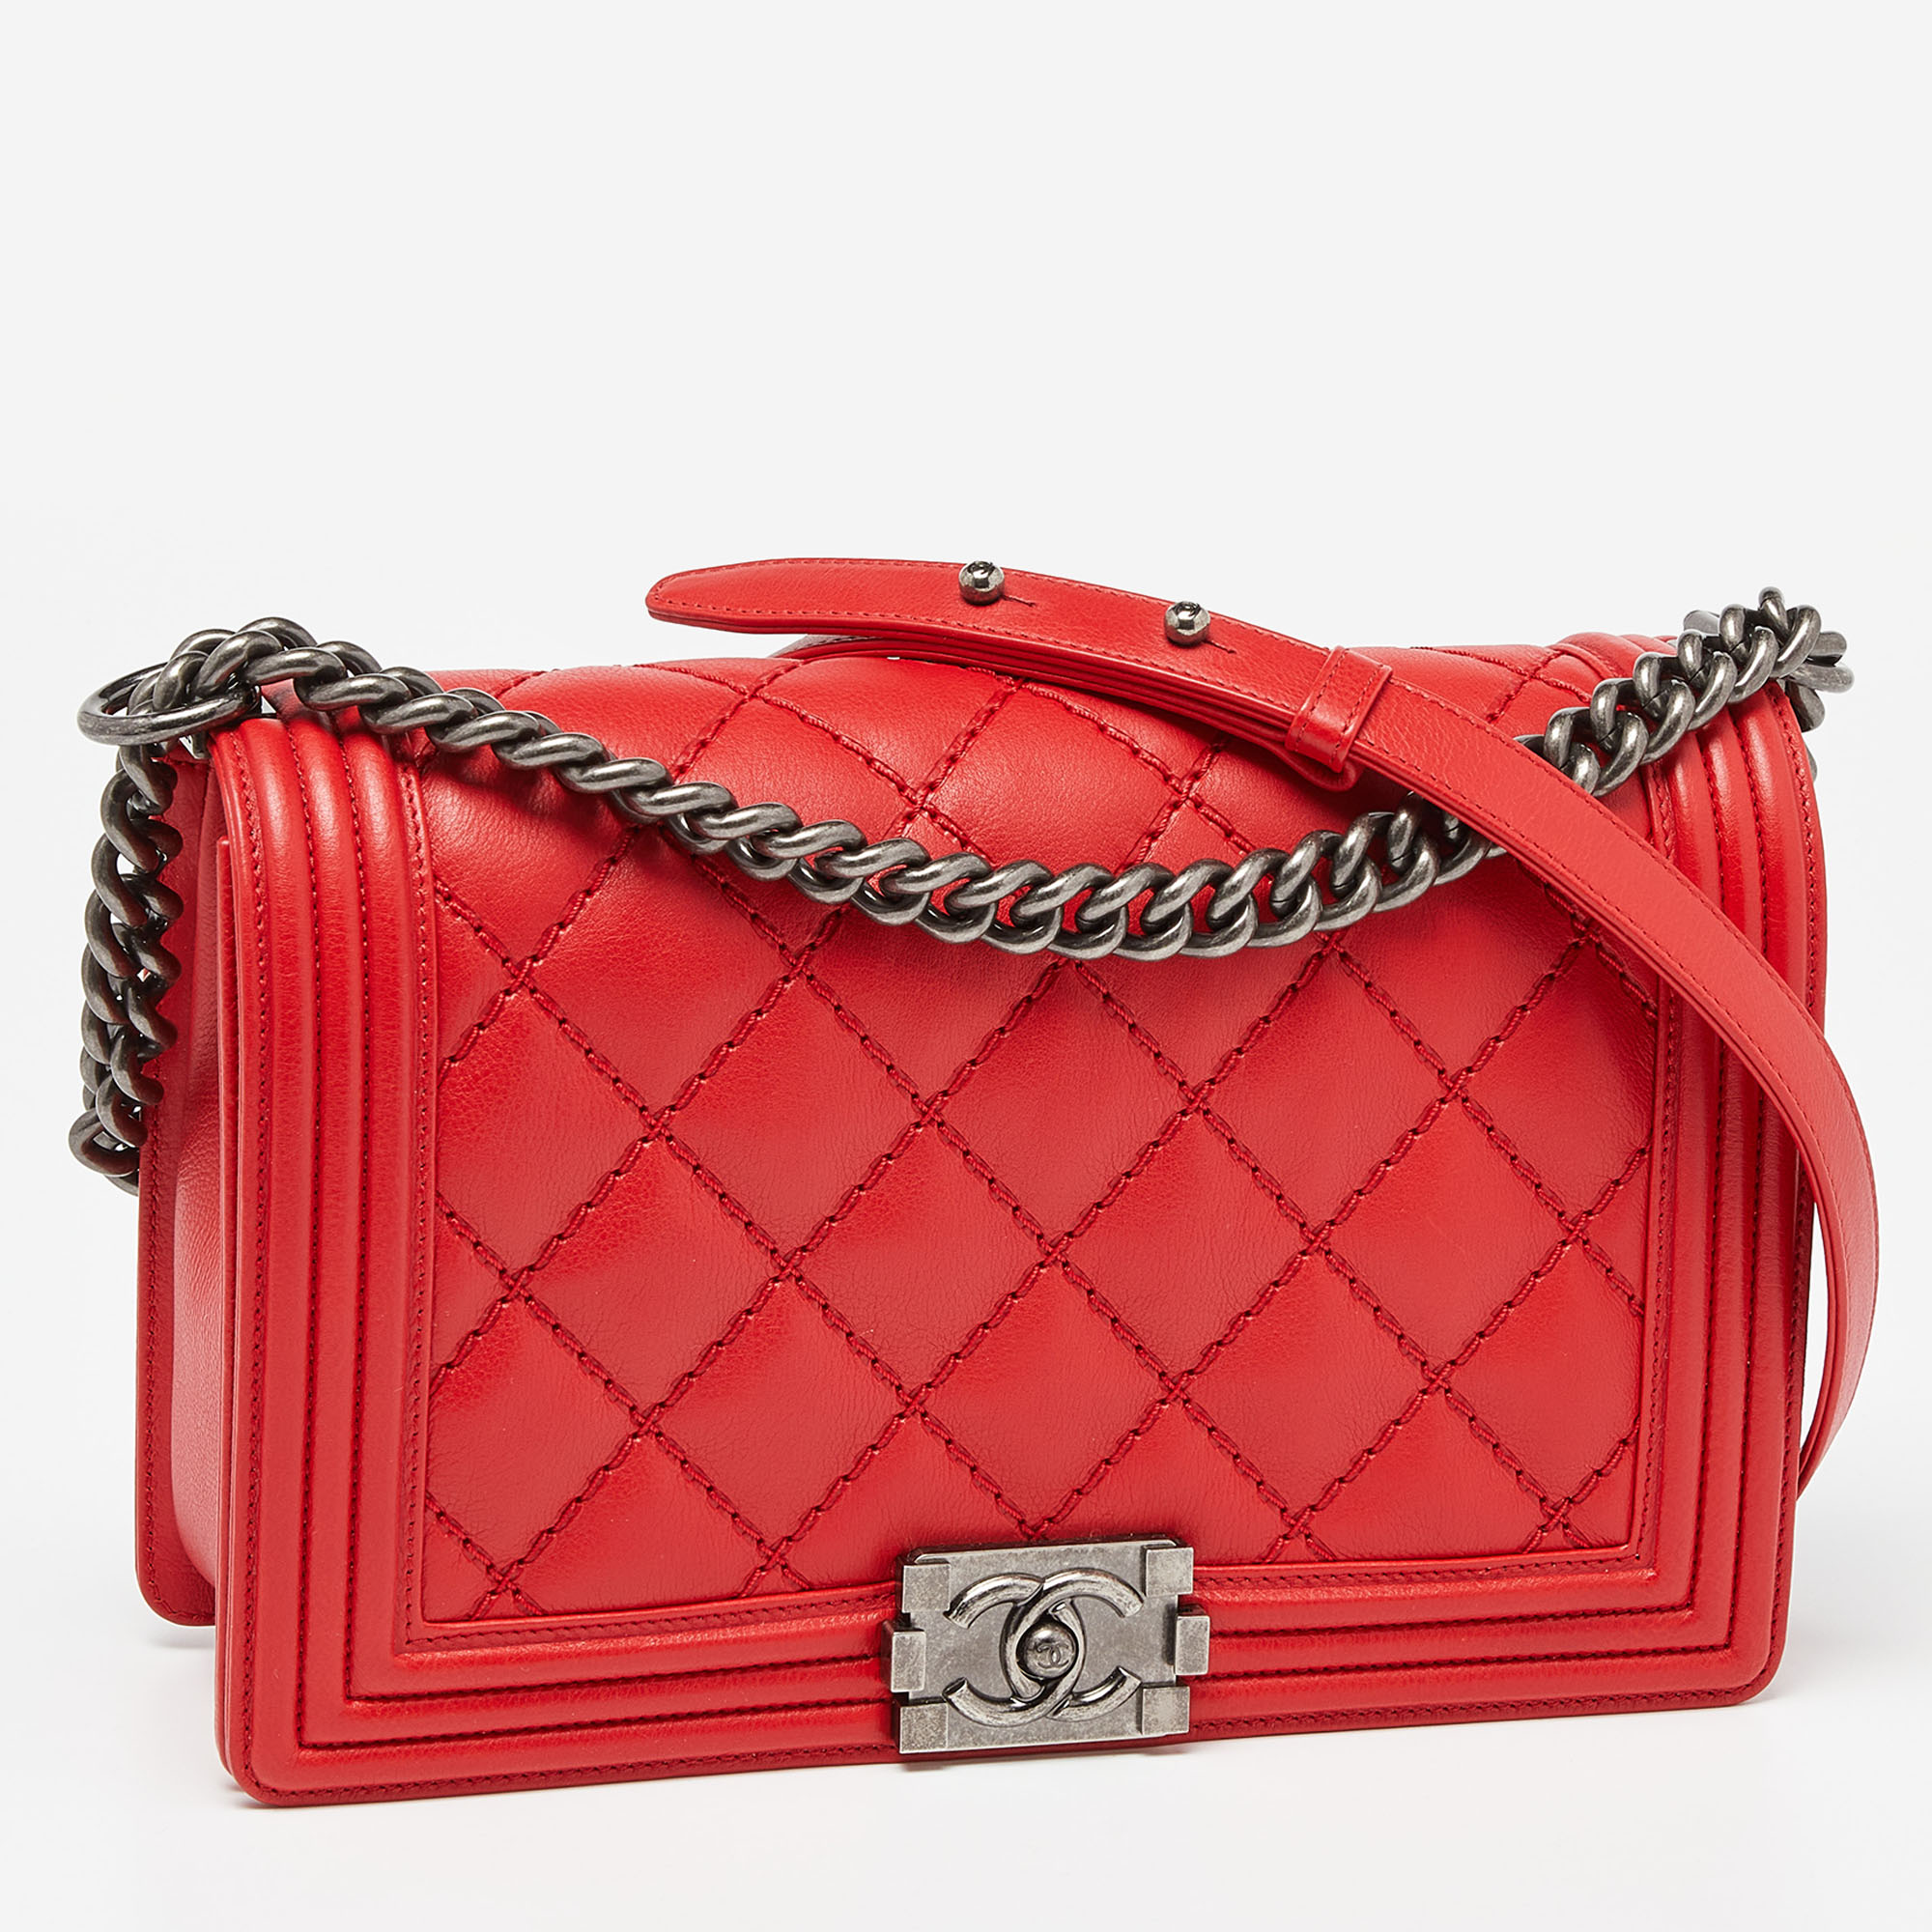 Chanel Red Diamond Stitch Quilted Leather New Medium Boy Bag